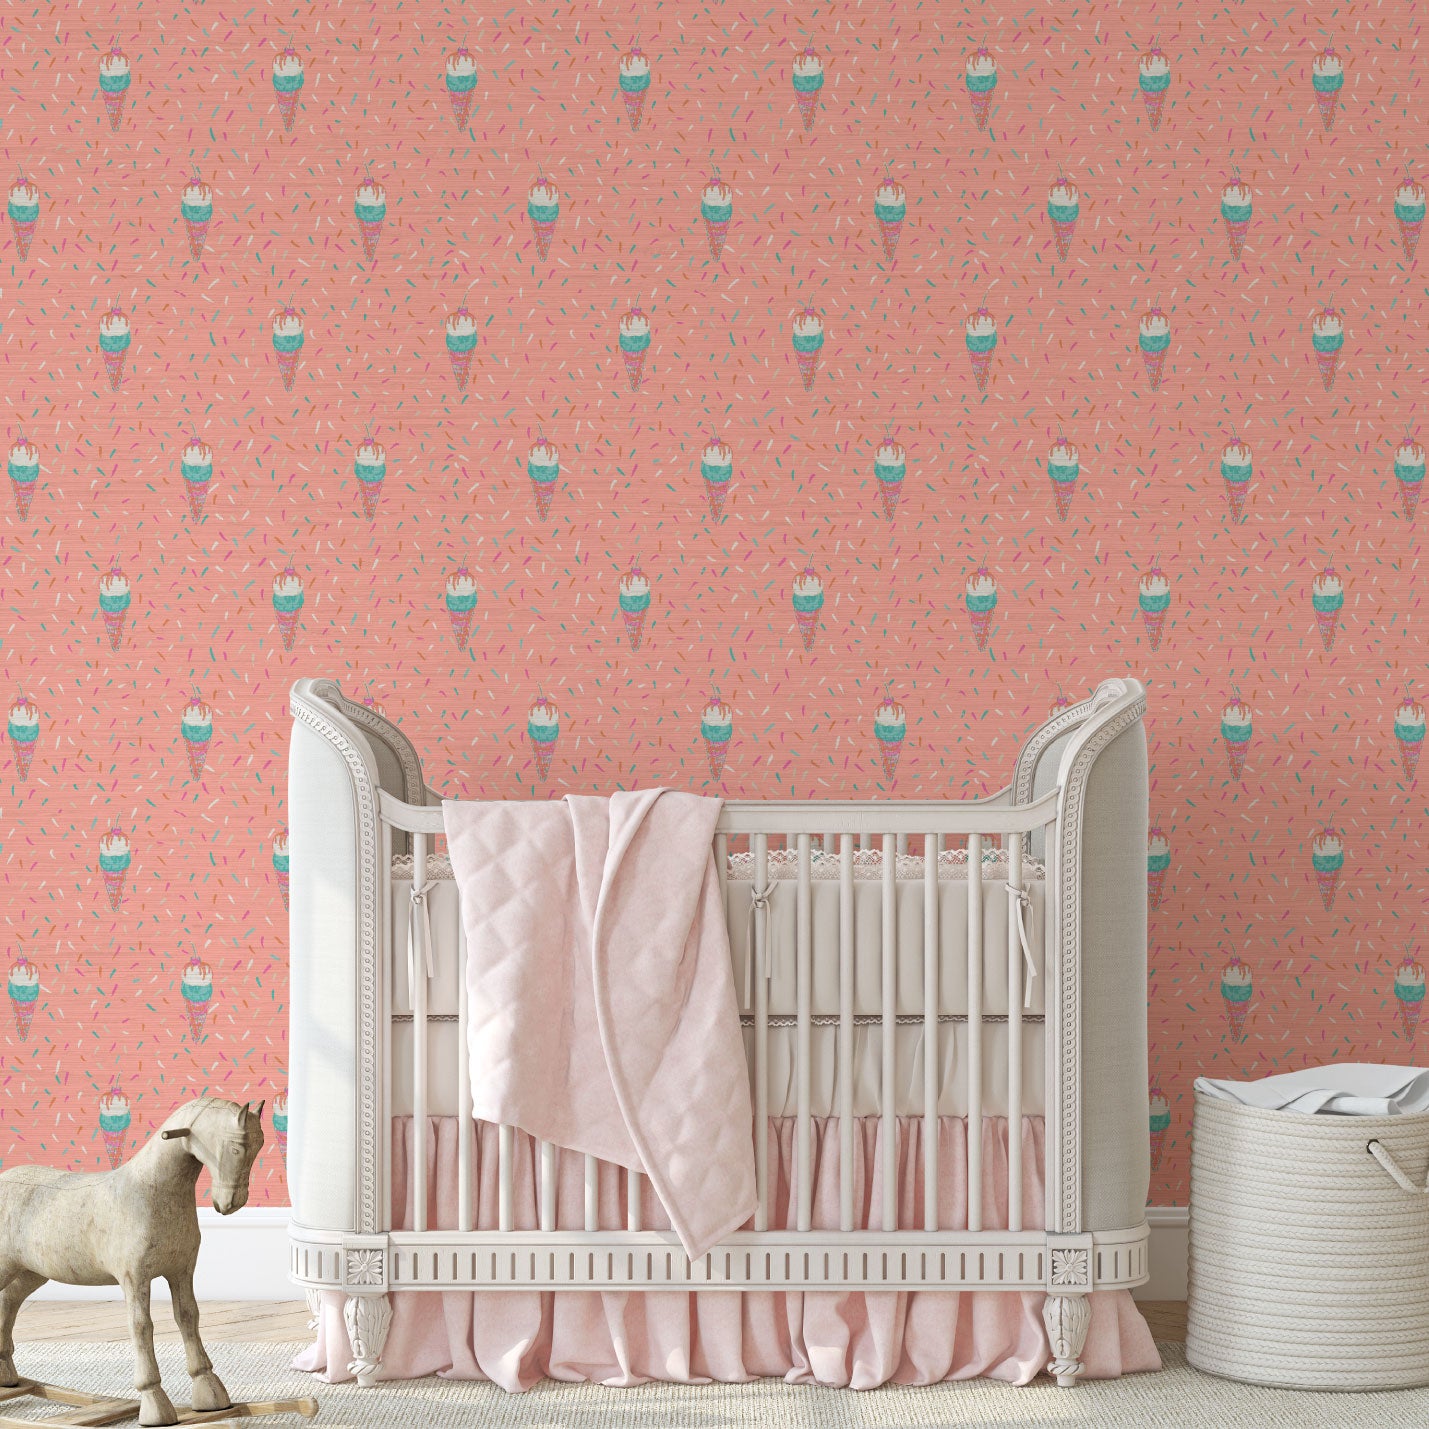 Grasscloth wallpaper Natural Textured Eco-Friendly Non-toxic High-quality  Sustainable Interior Design Bold Custom Tailor-made Retro chic restaurant food sundae ice cream pink sprinkles kids playroom restaurant 